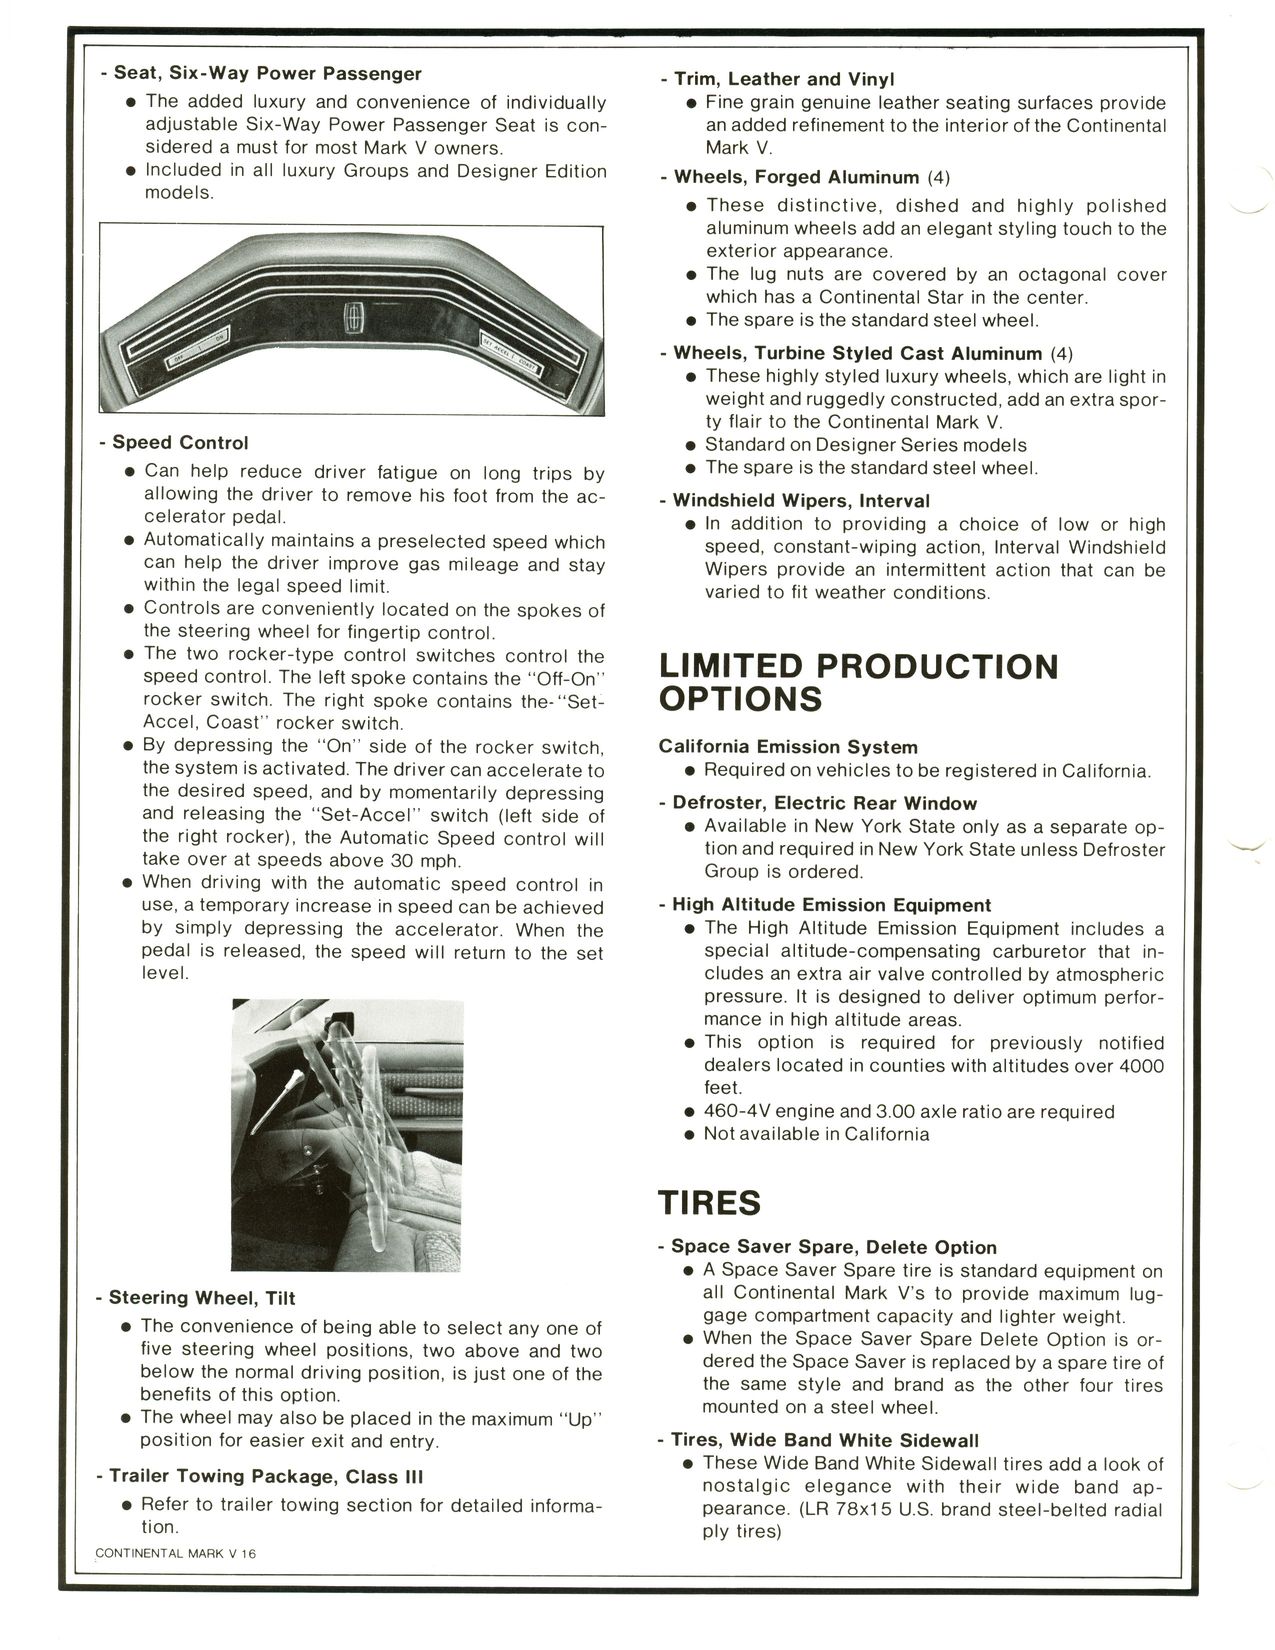 1977 Continental Product Facts Book-1-16